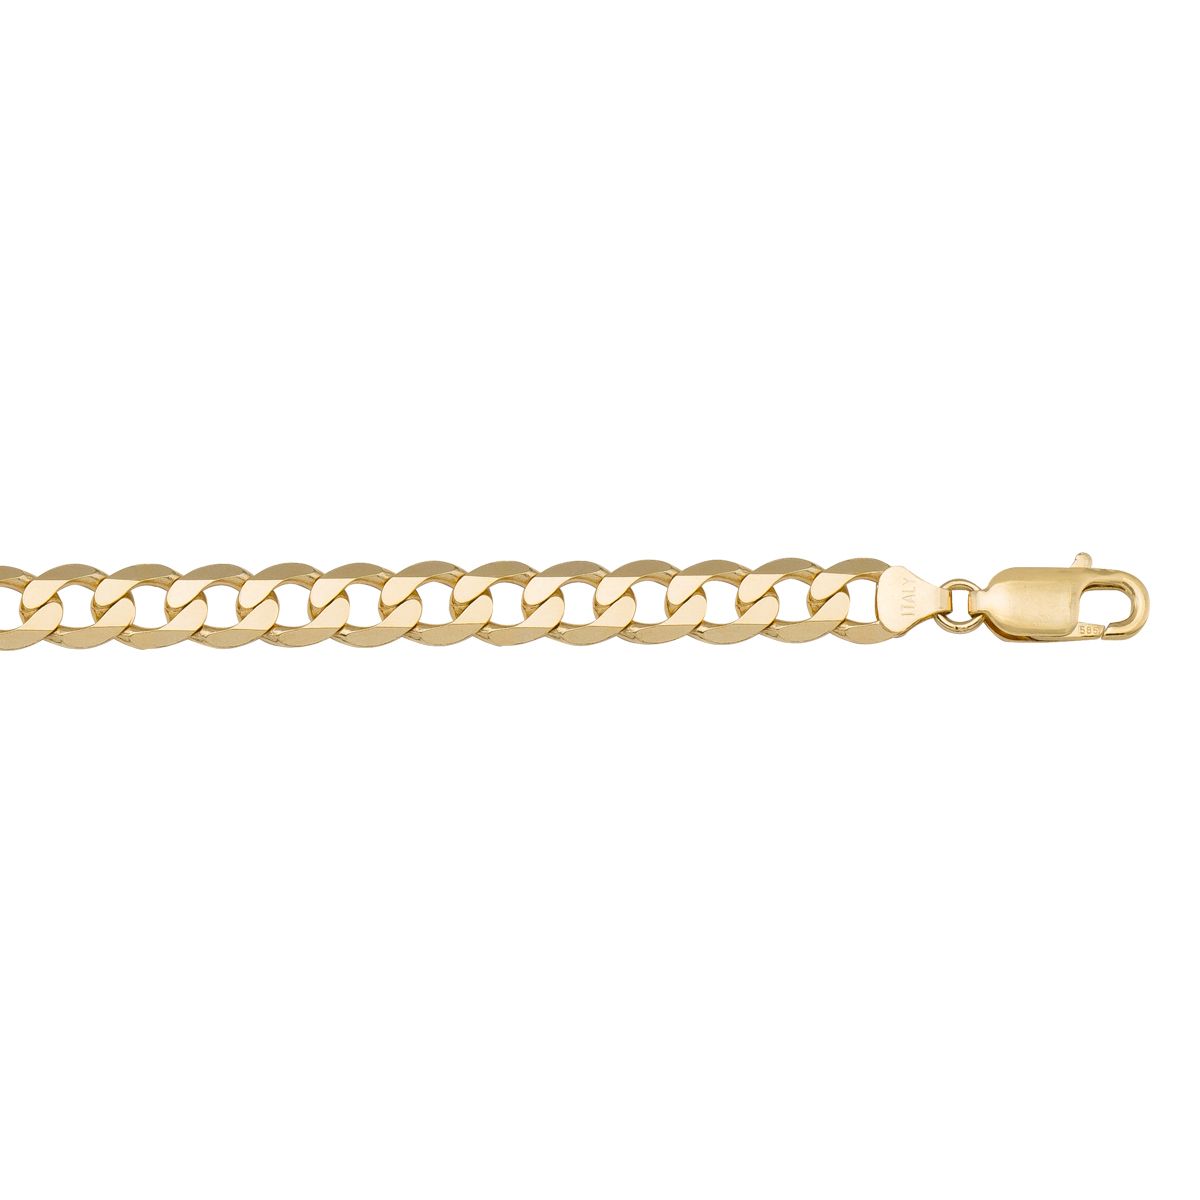 CCRB04, Gold Bracelet, Open Curb, Yellow Gold